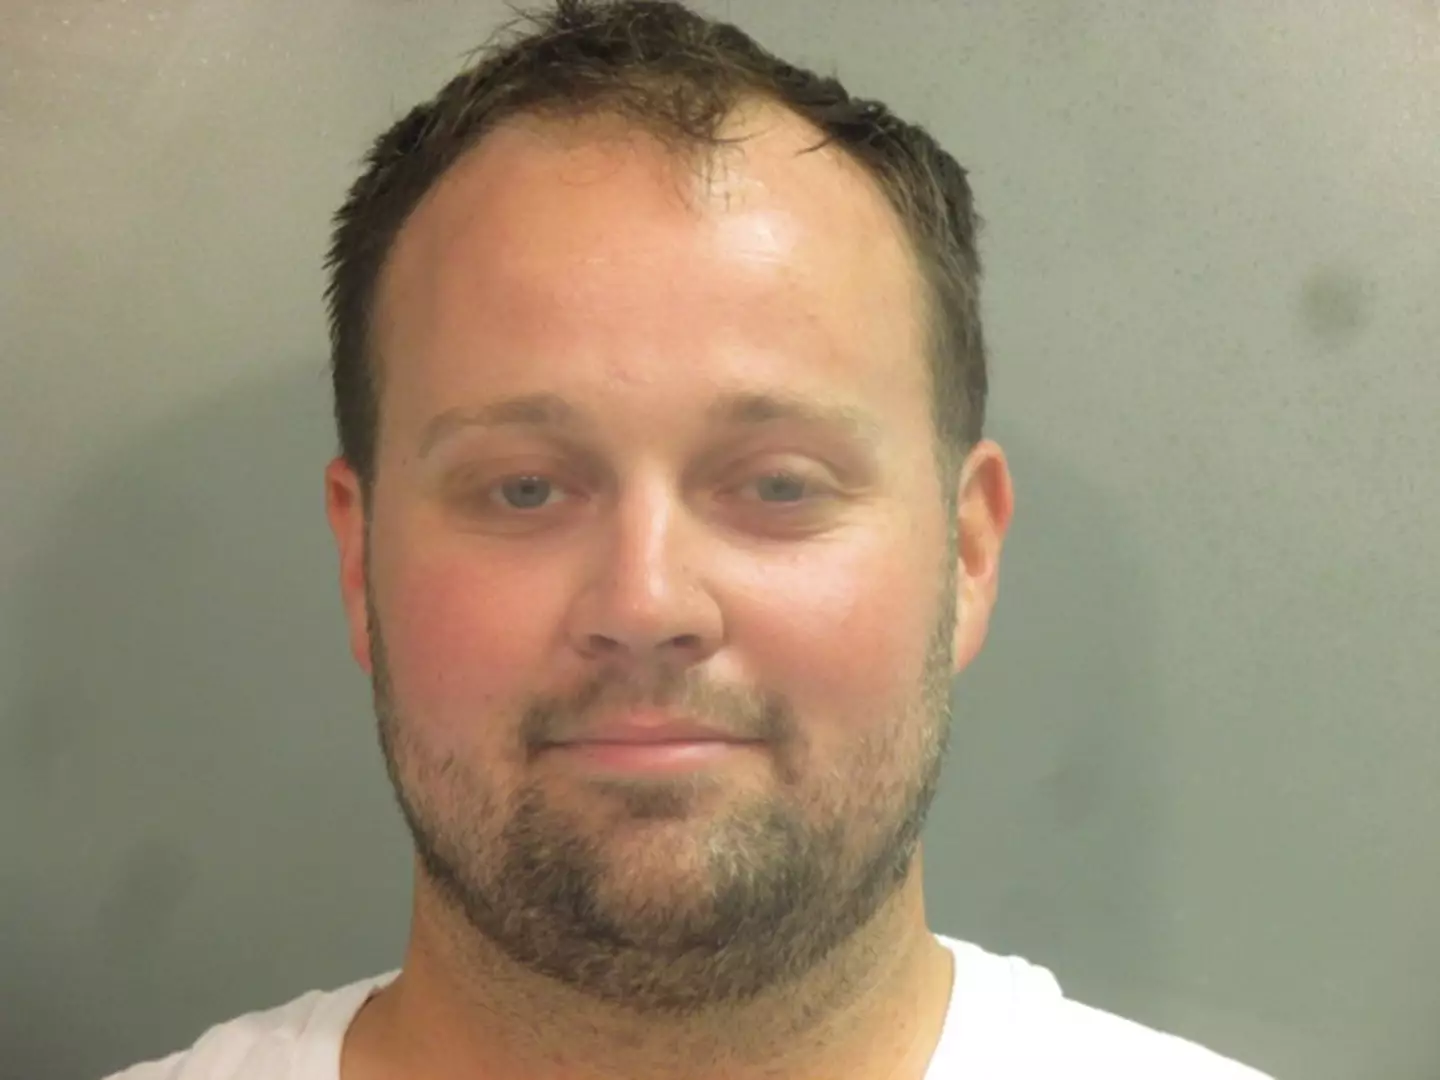 In May 2022, Duggar was sentenced to 151 months in prison on charges related to the receipt of child pornography and possession of child pornography.